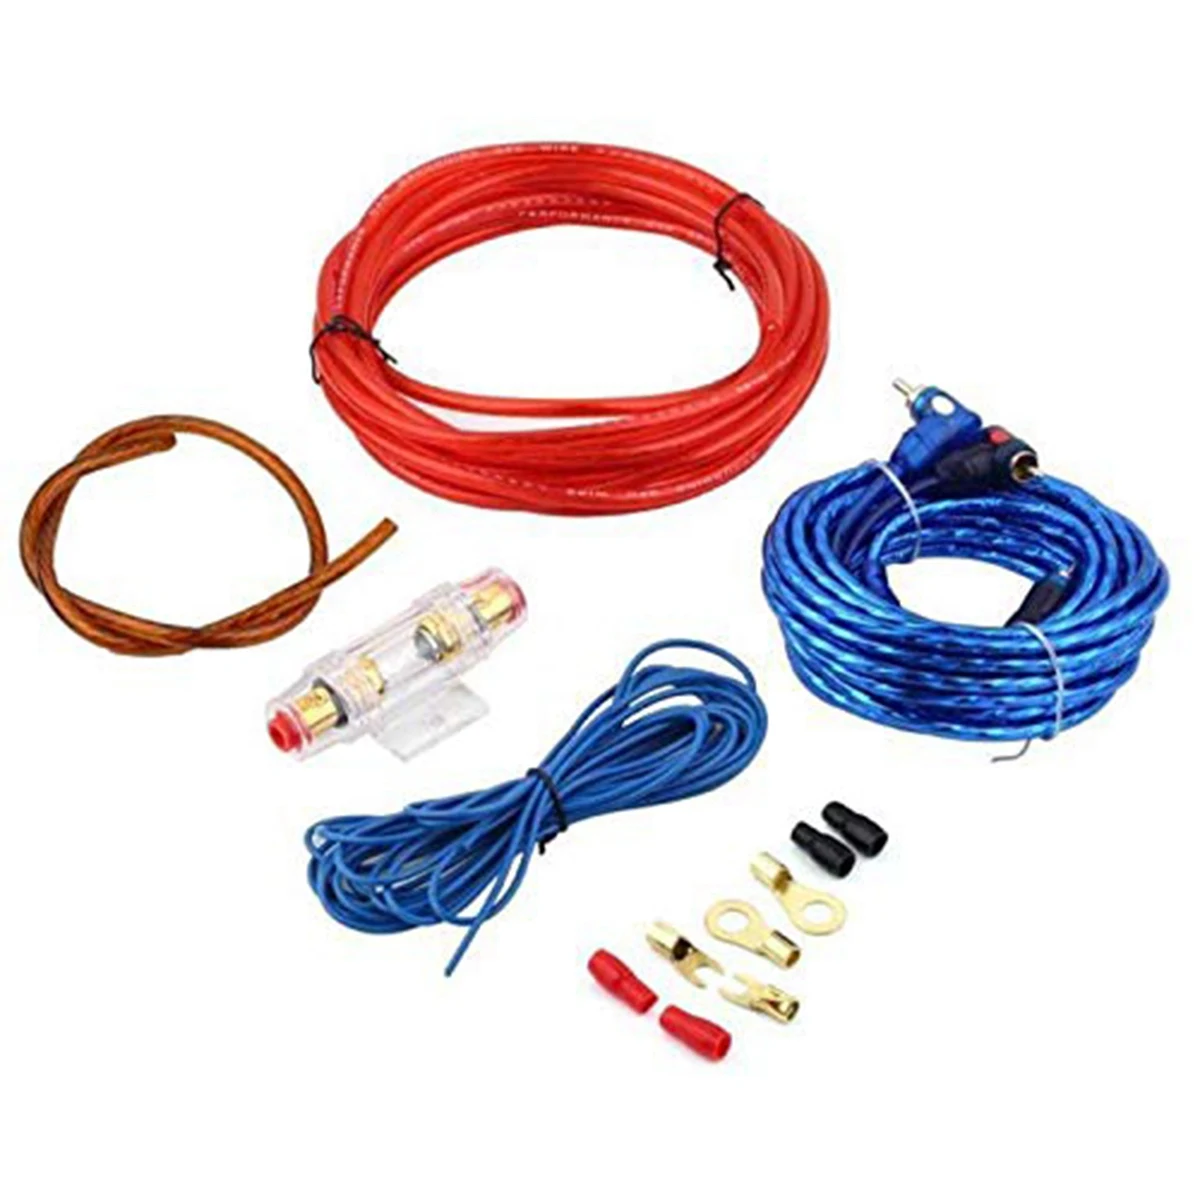 

60 AMP Fuse Holder 8GA Power Cable Subwoofer Speaker Car Audio Wire Wiring Amplifier RCA Power Cable Fuse Kit